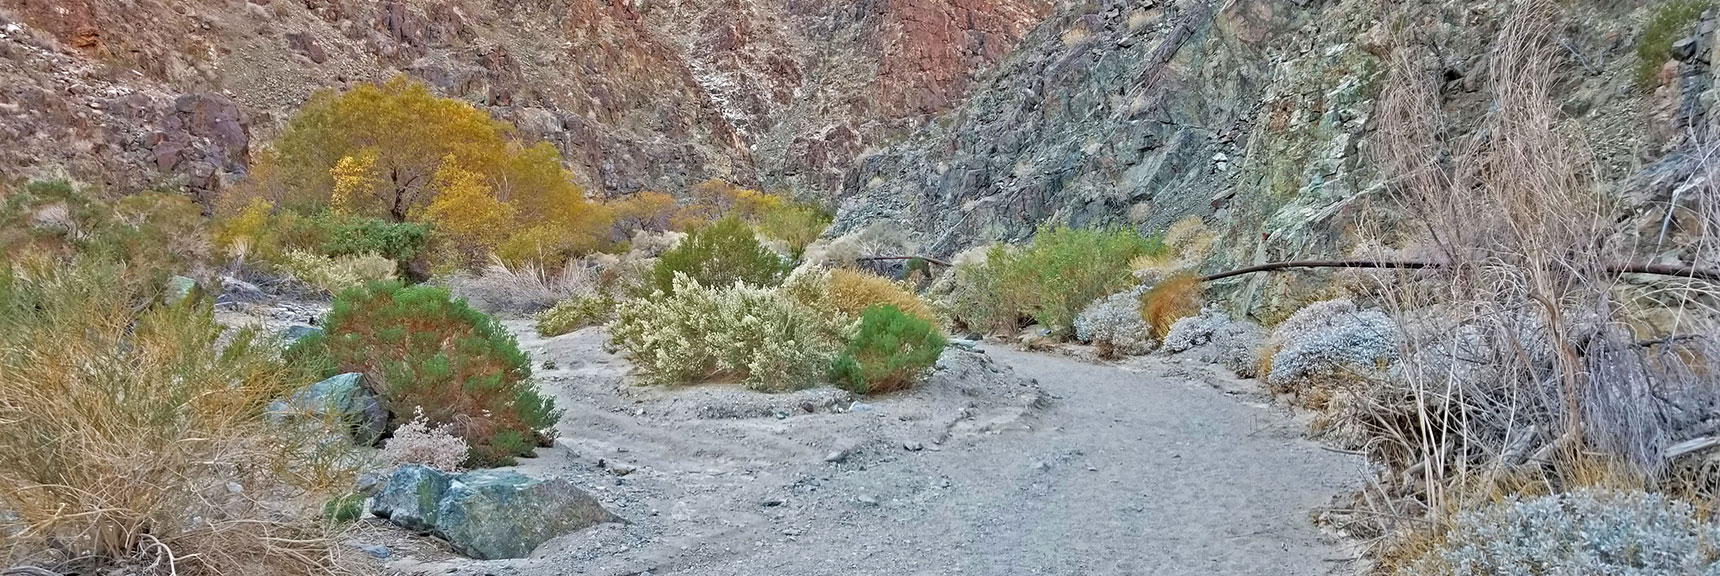 Continuing Up the Canyon, Along the Pipe That is the Water Source for Panamint Springs Village. | Darwin Falls, Death Valley National Park, California